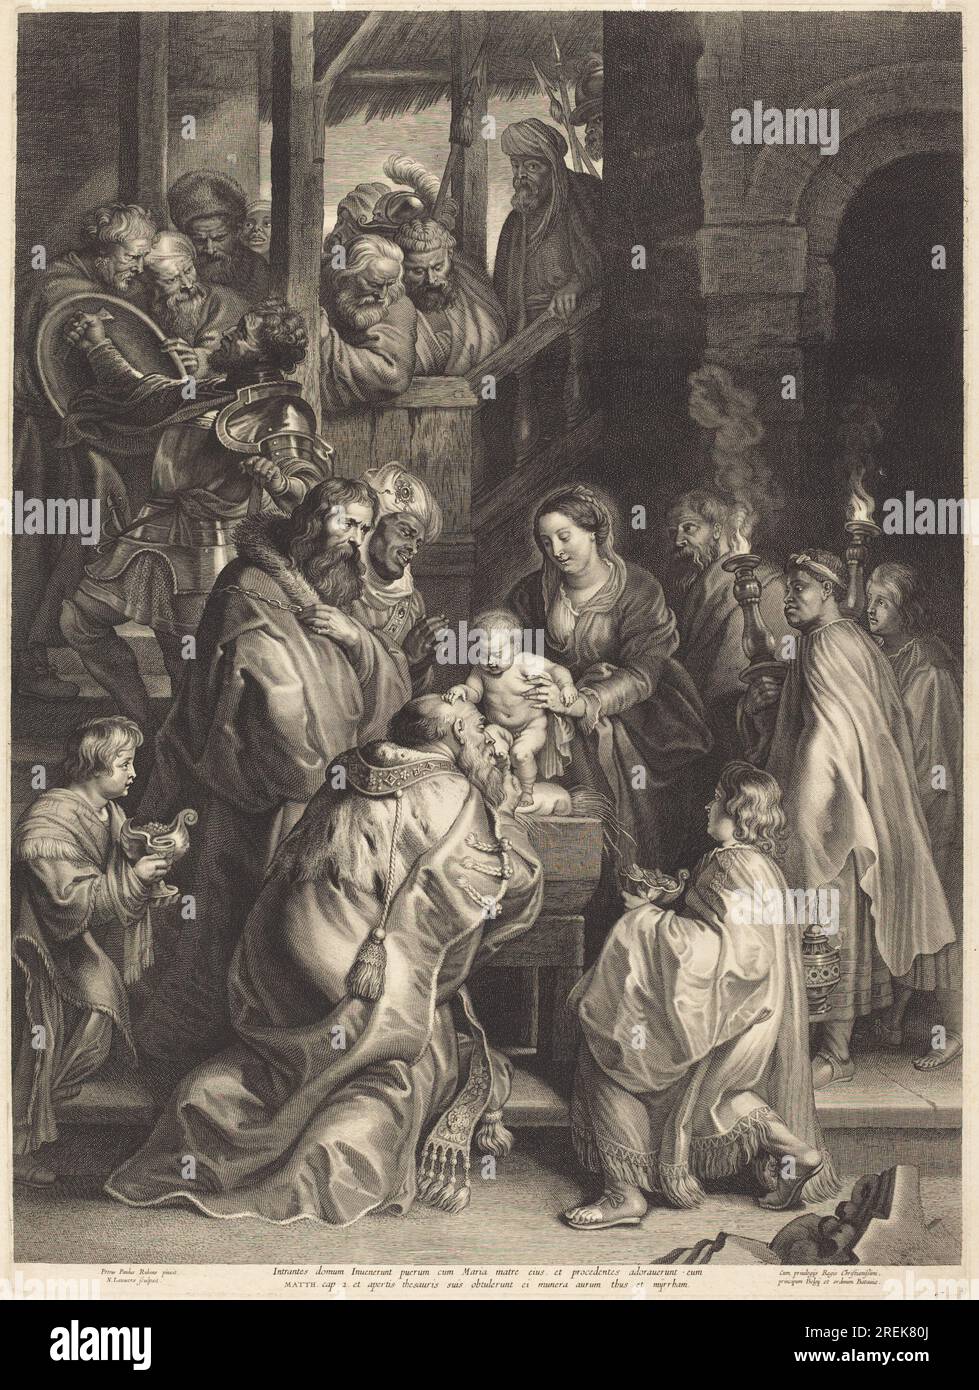 'Nicolaes Lauwers, after Sir Peter Paul Rubens, The Adoration of the Magi with Torches, engraving on laid paper, plate: 60.7 x 45.4 cm (23 7/8 x 17 7/8 in.) sheet: 65.5 x 50.2 cm (25 13/16 x 19 3/4 in.), Gift of David P. Tunick, 2009.127.21' Stock Photo